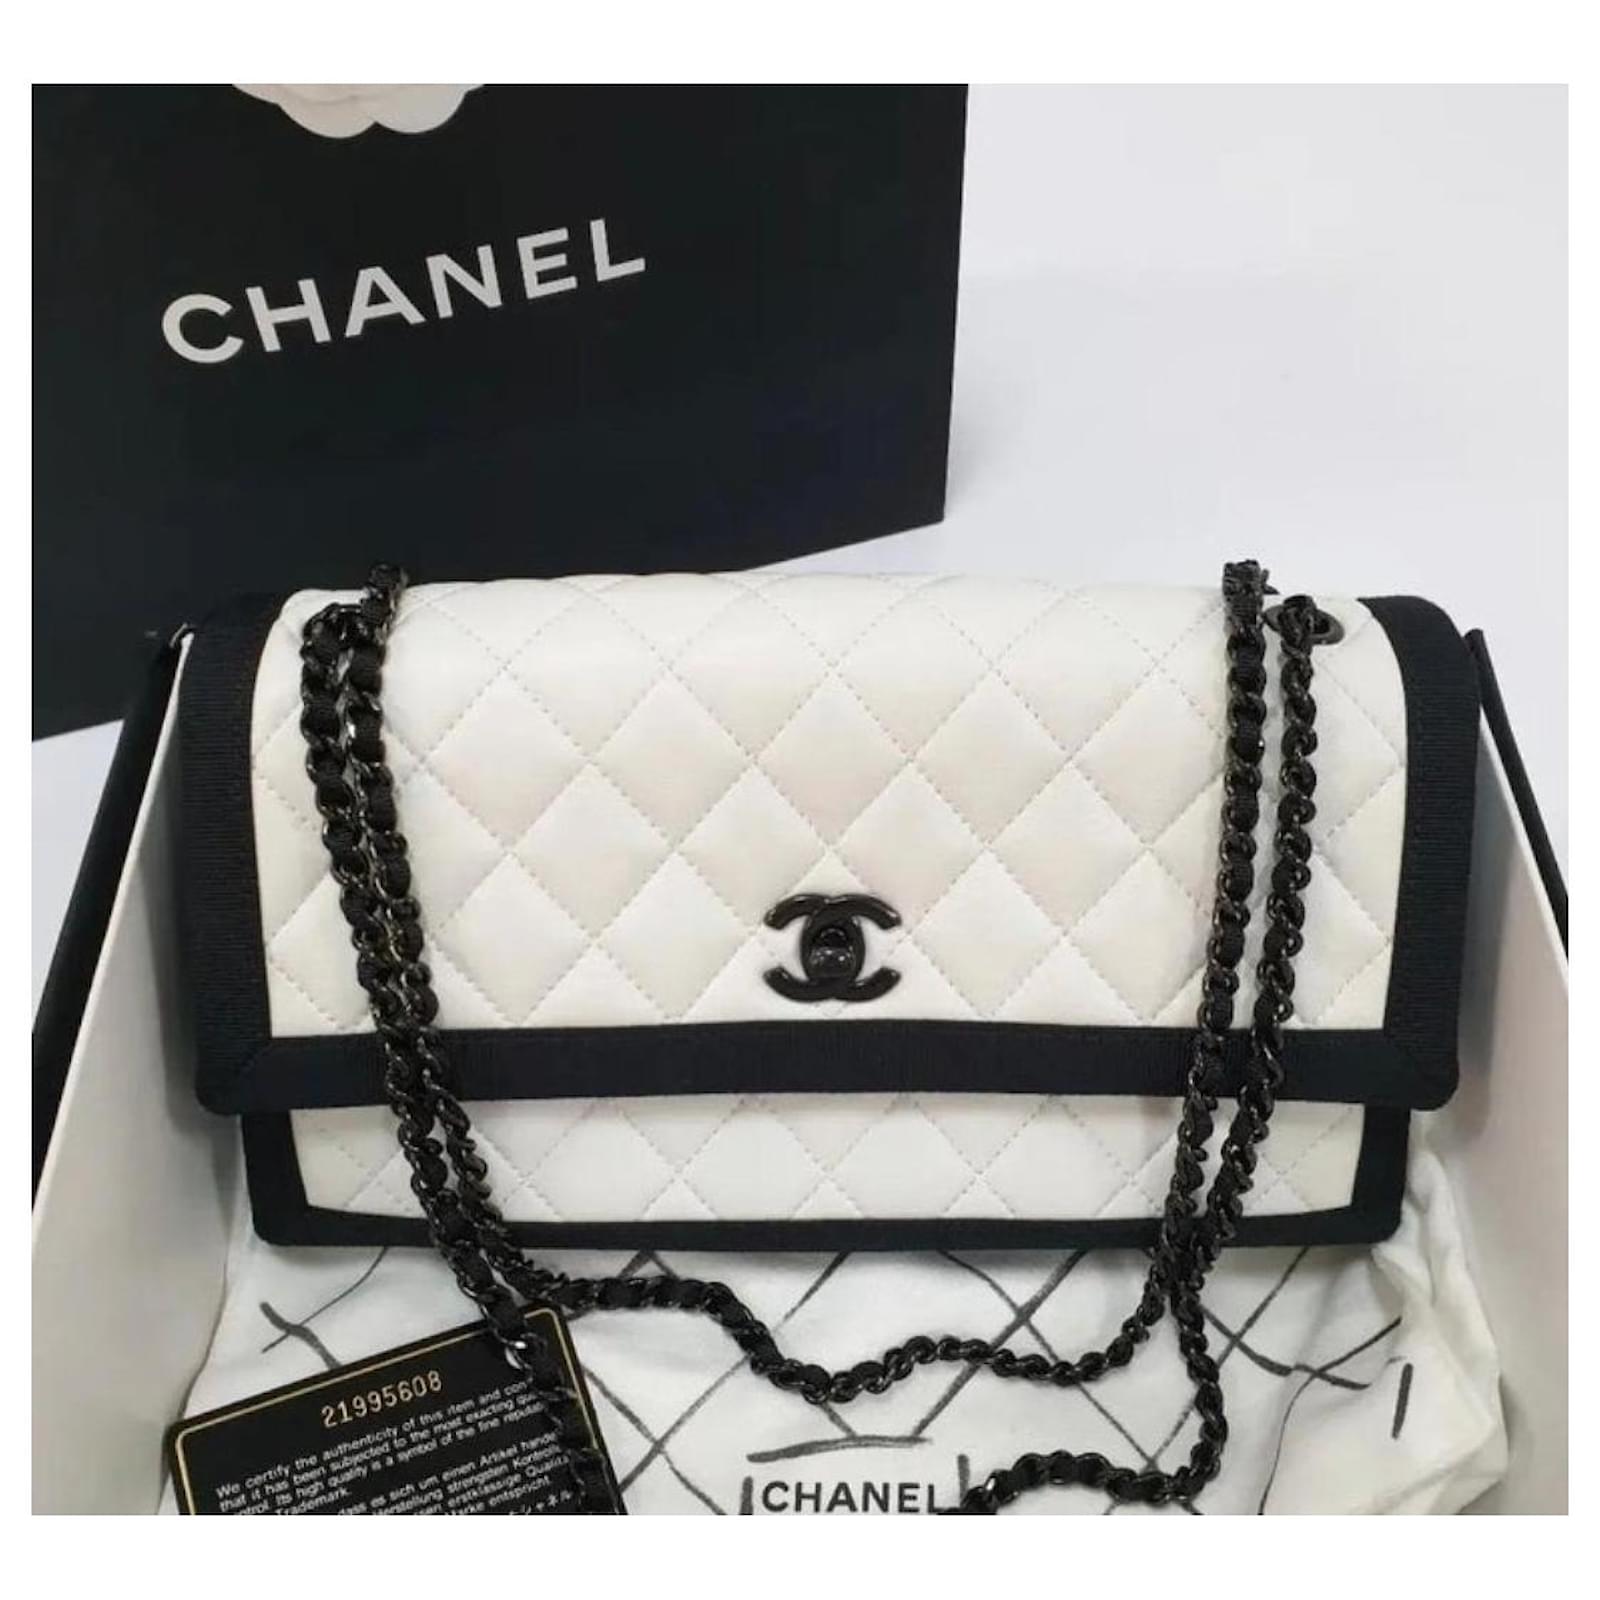 CHANEL, Bags, New Chanel Trendy Cc Flap Bag Quilted Lambskin Medium Black